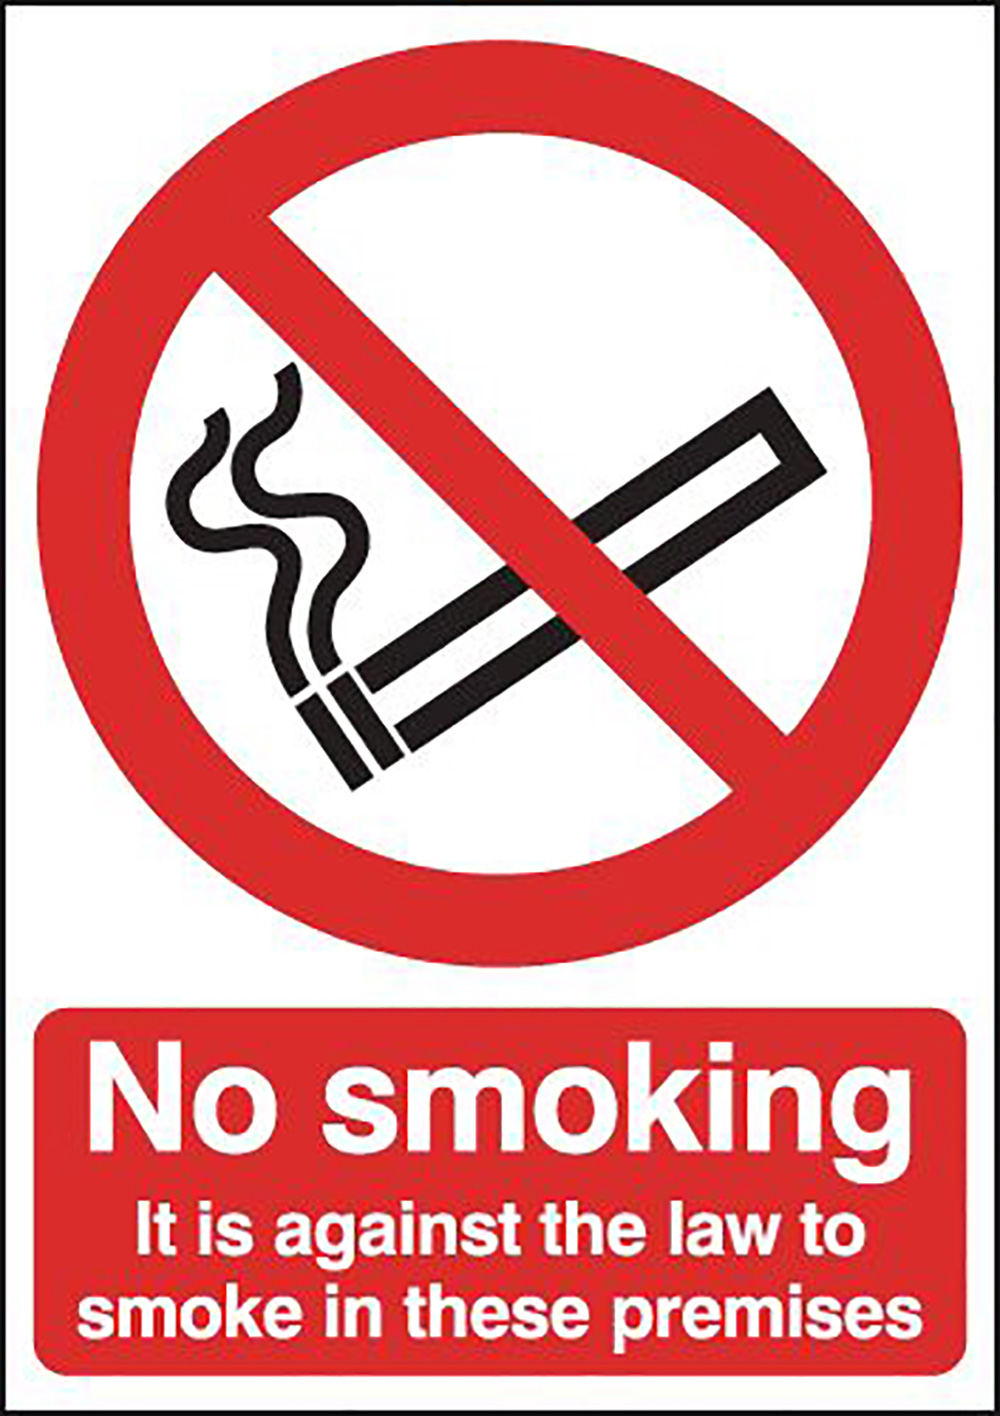 No Smoking It Is Against The Law  297x210mm Self Adhesive Vinyl Safety Sign  